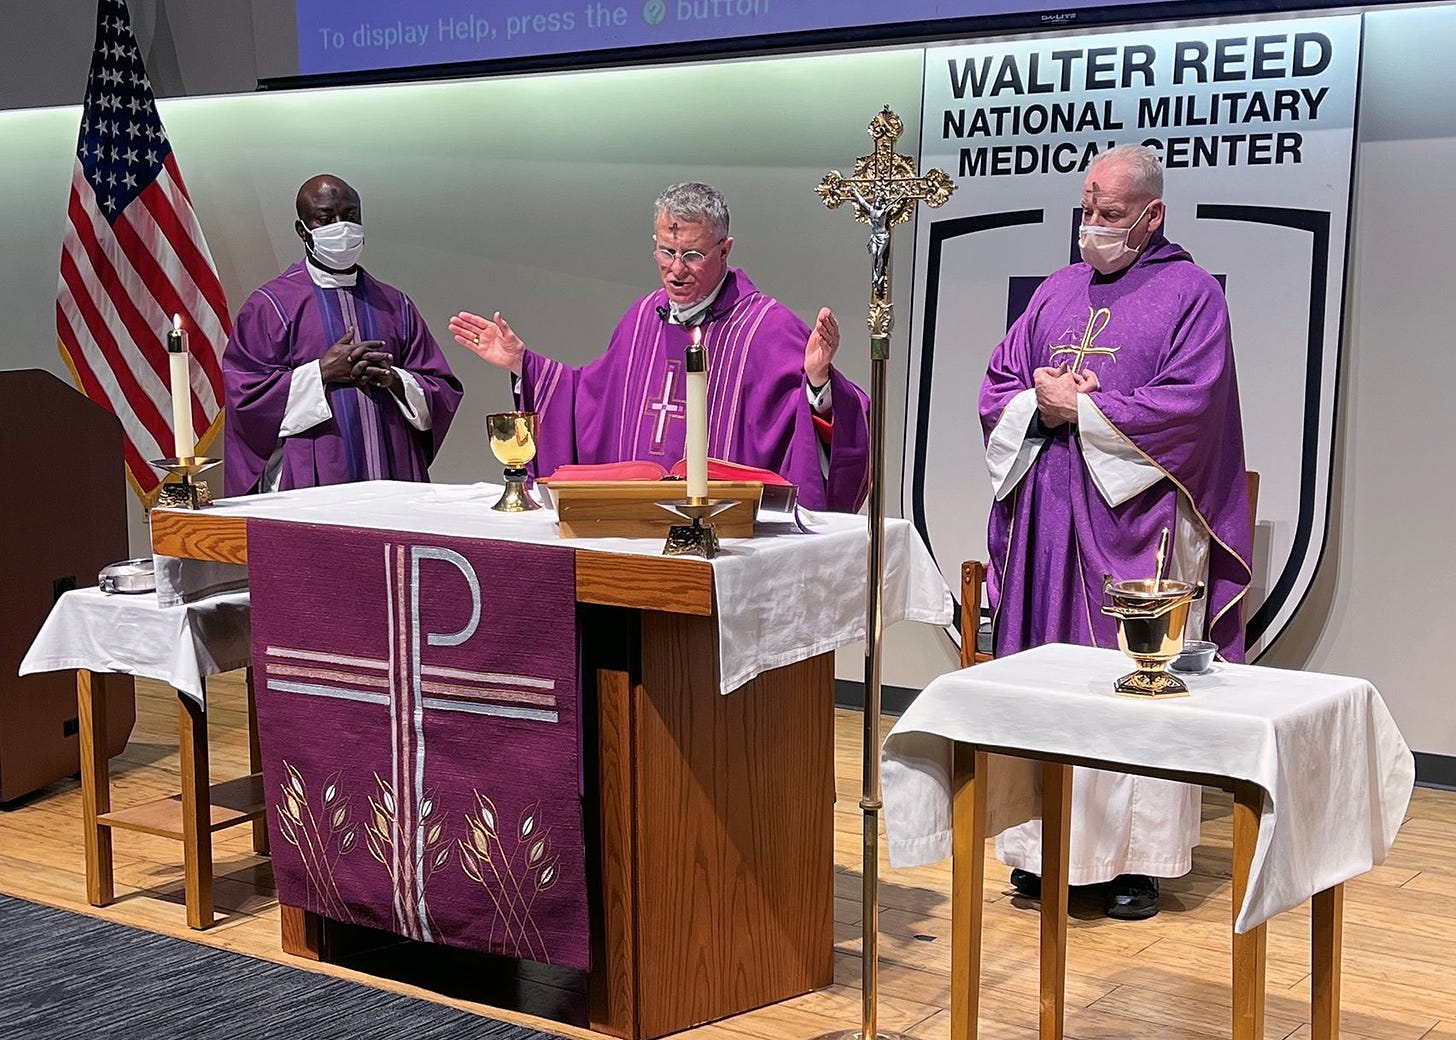 Archbishop Timothy P. Broglio of the U.S. Archdiocese of the Military Services celebrates Ash Wednesday Mass at Walter Reed National Military Medical Center in Bethesda, Md., March 2, 2022. Walter Reed hospital terminated March 31, 2023, a contract with Franciscan priests and brothers to provide pastoral care to Catholics, in advance of Holy Week. (OSV News photo/courtesy U.S. Archdiocese of the Military Services)